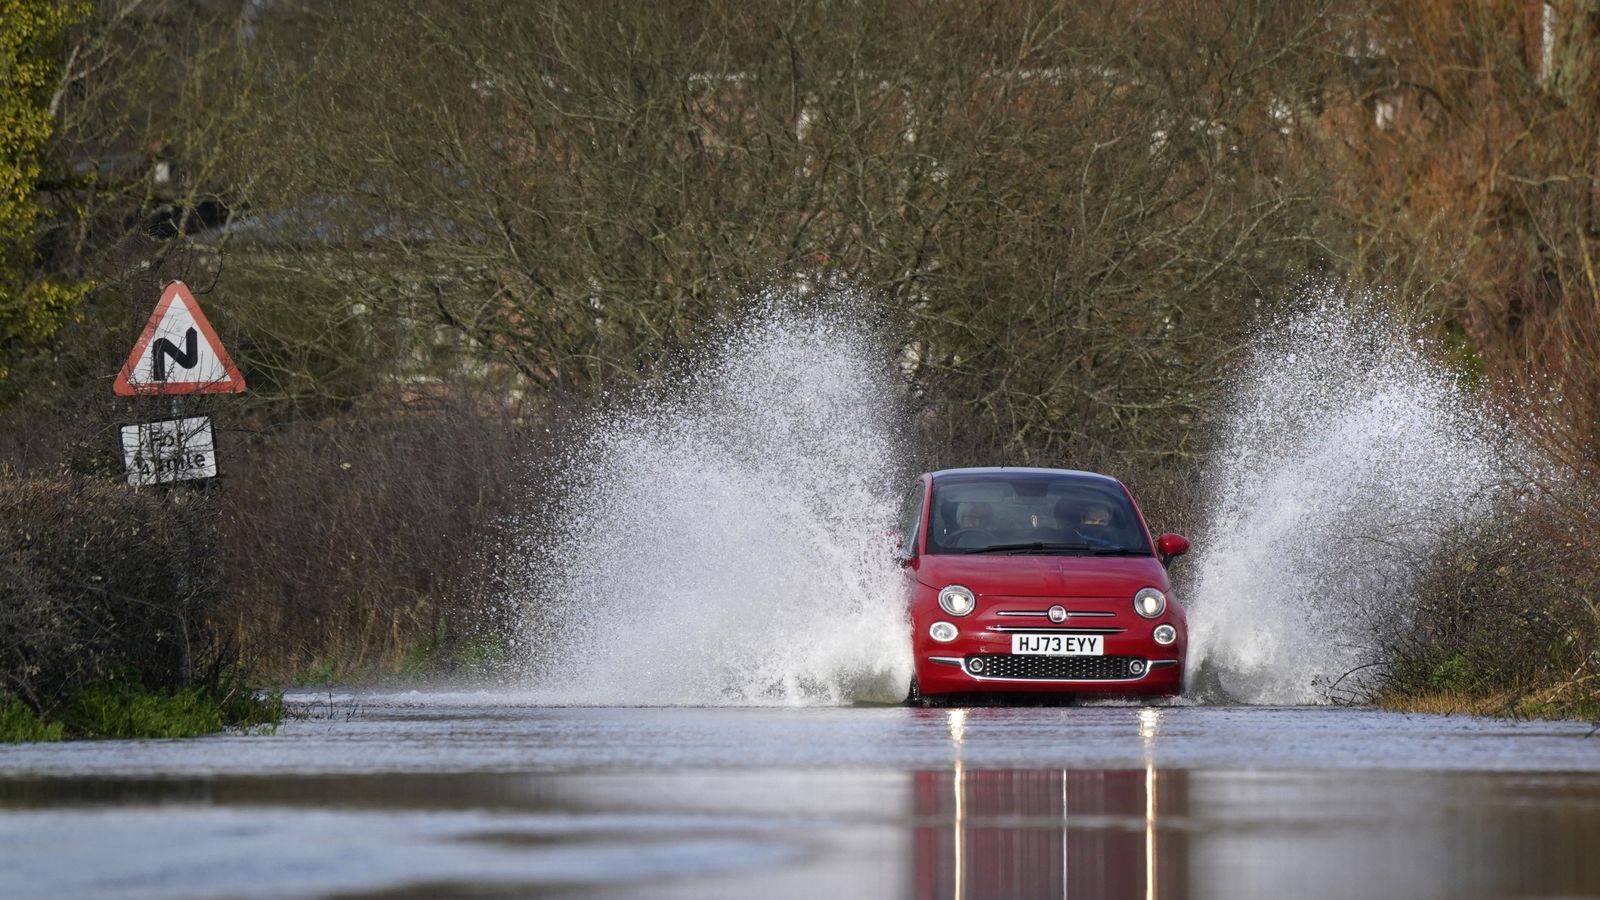 UK weather: Amber warning for heavy rain issued with 'danger to life' alert